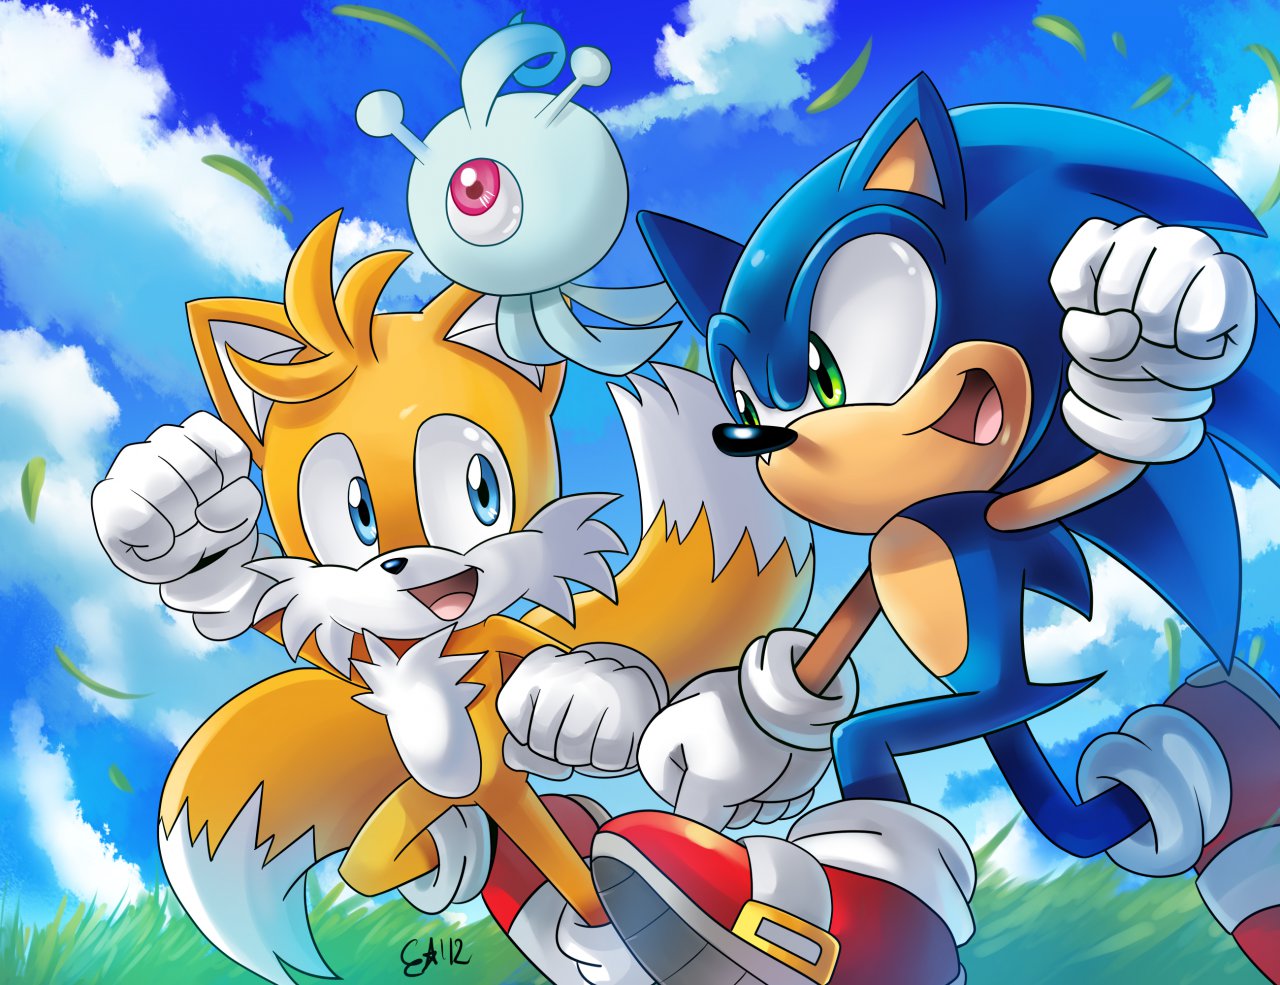 Sonic Colors by DurkyBroght -- Fur Affinity [dot] net